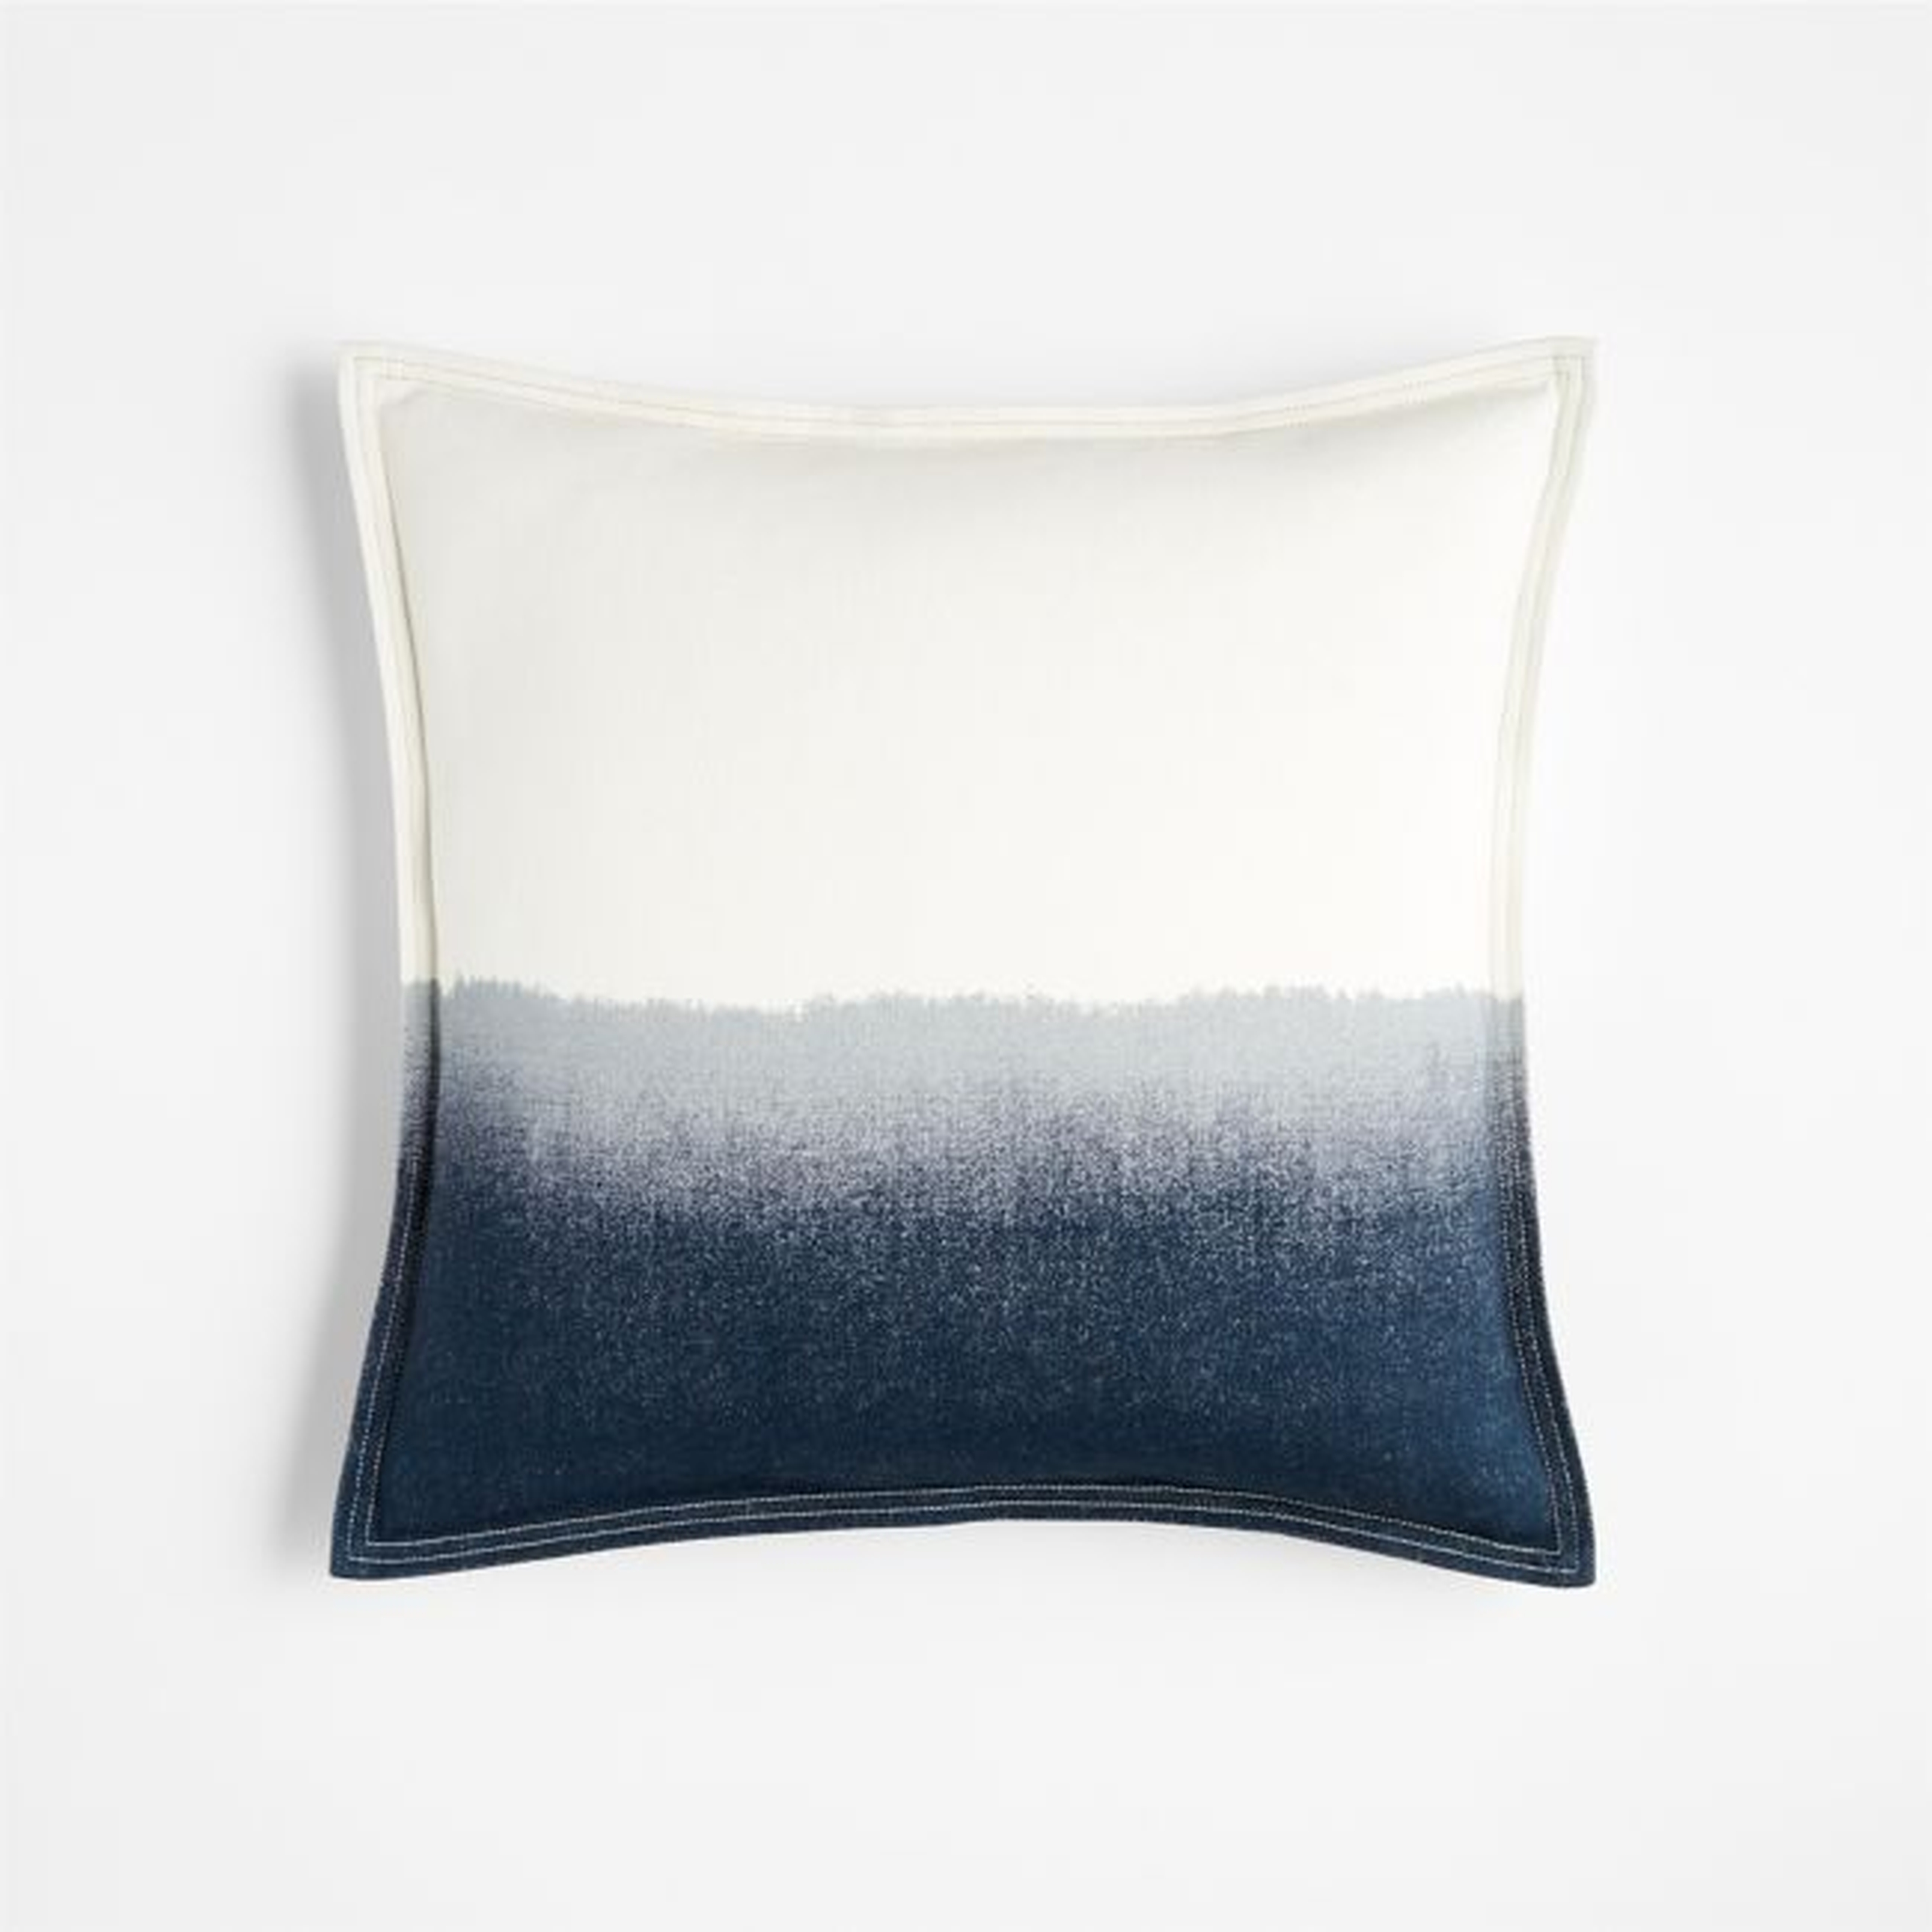 Tulare Dip-Dyed Pillow Cover, Down-Alternative Insert, Blue, 18" x 18" - Crate and Barrel